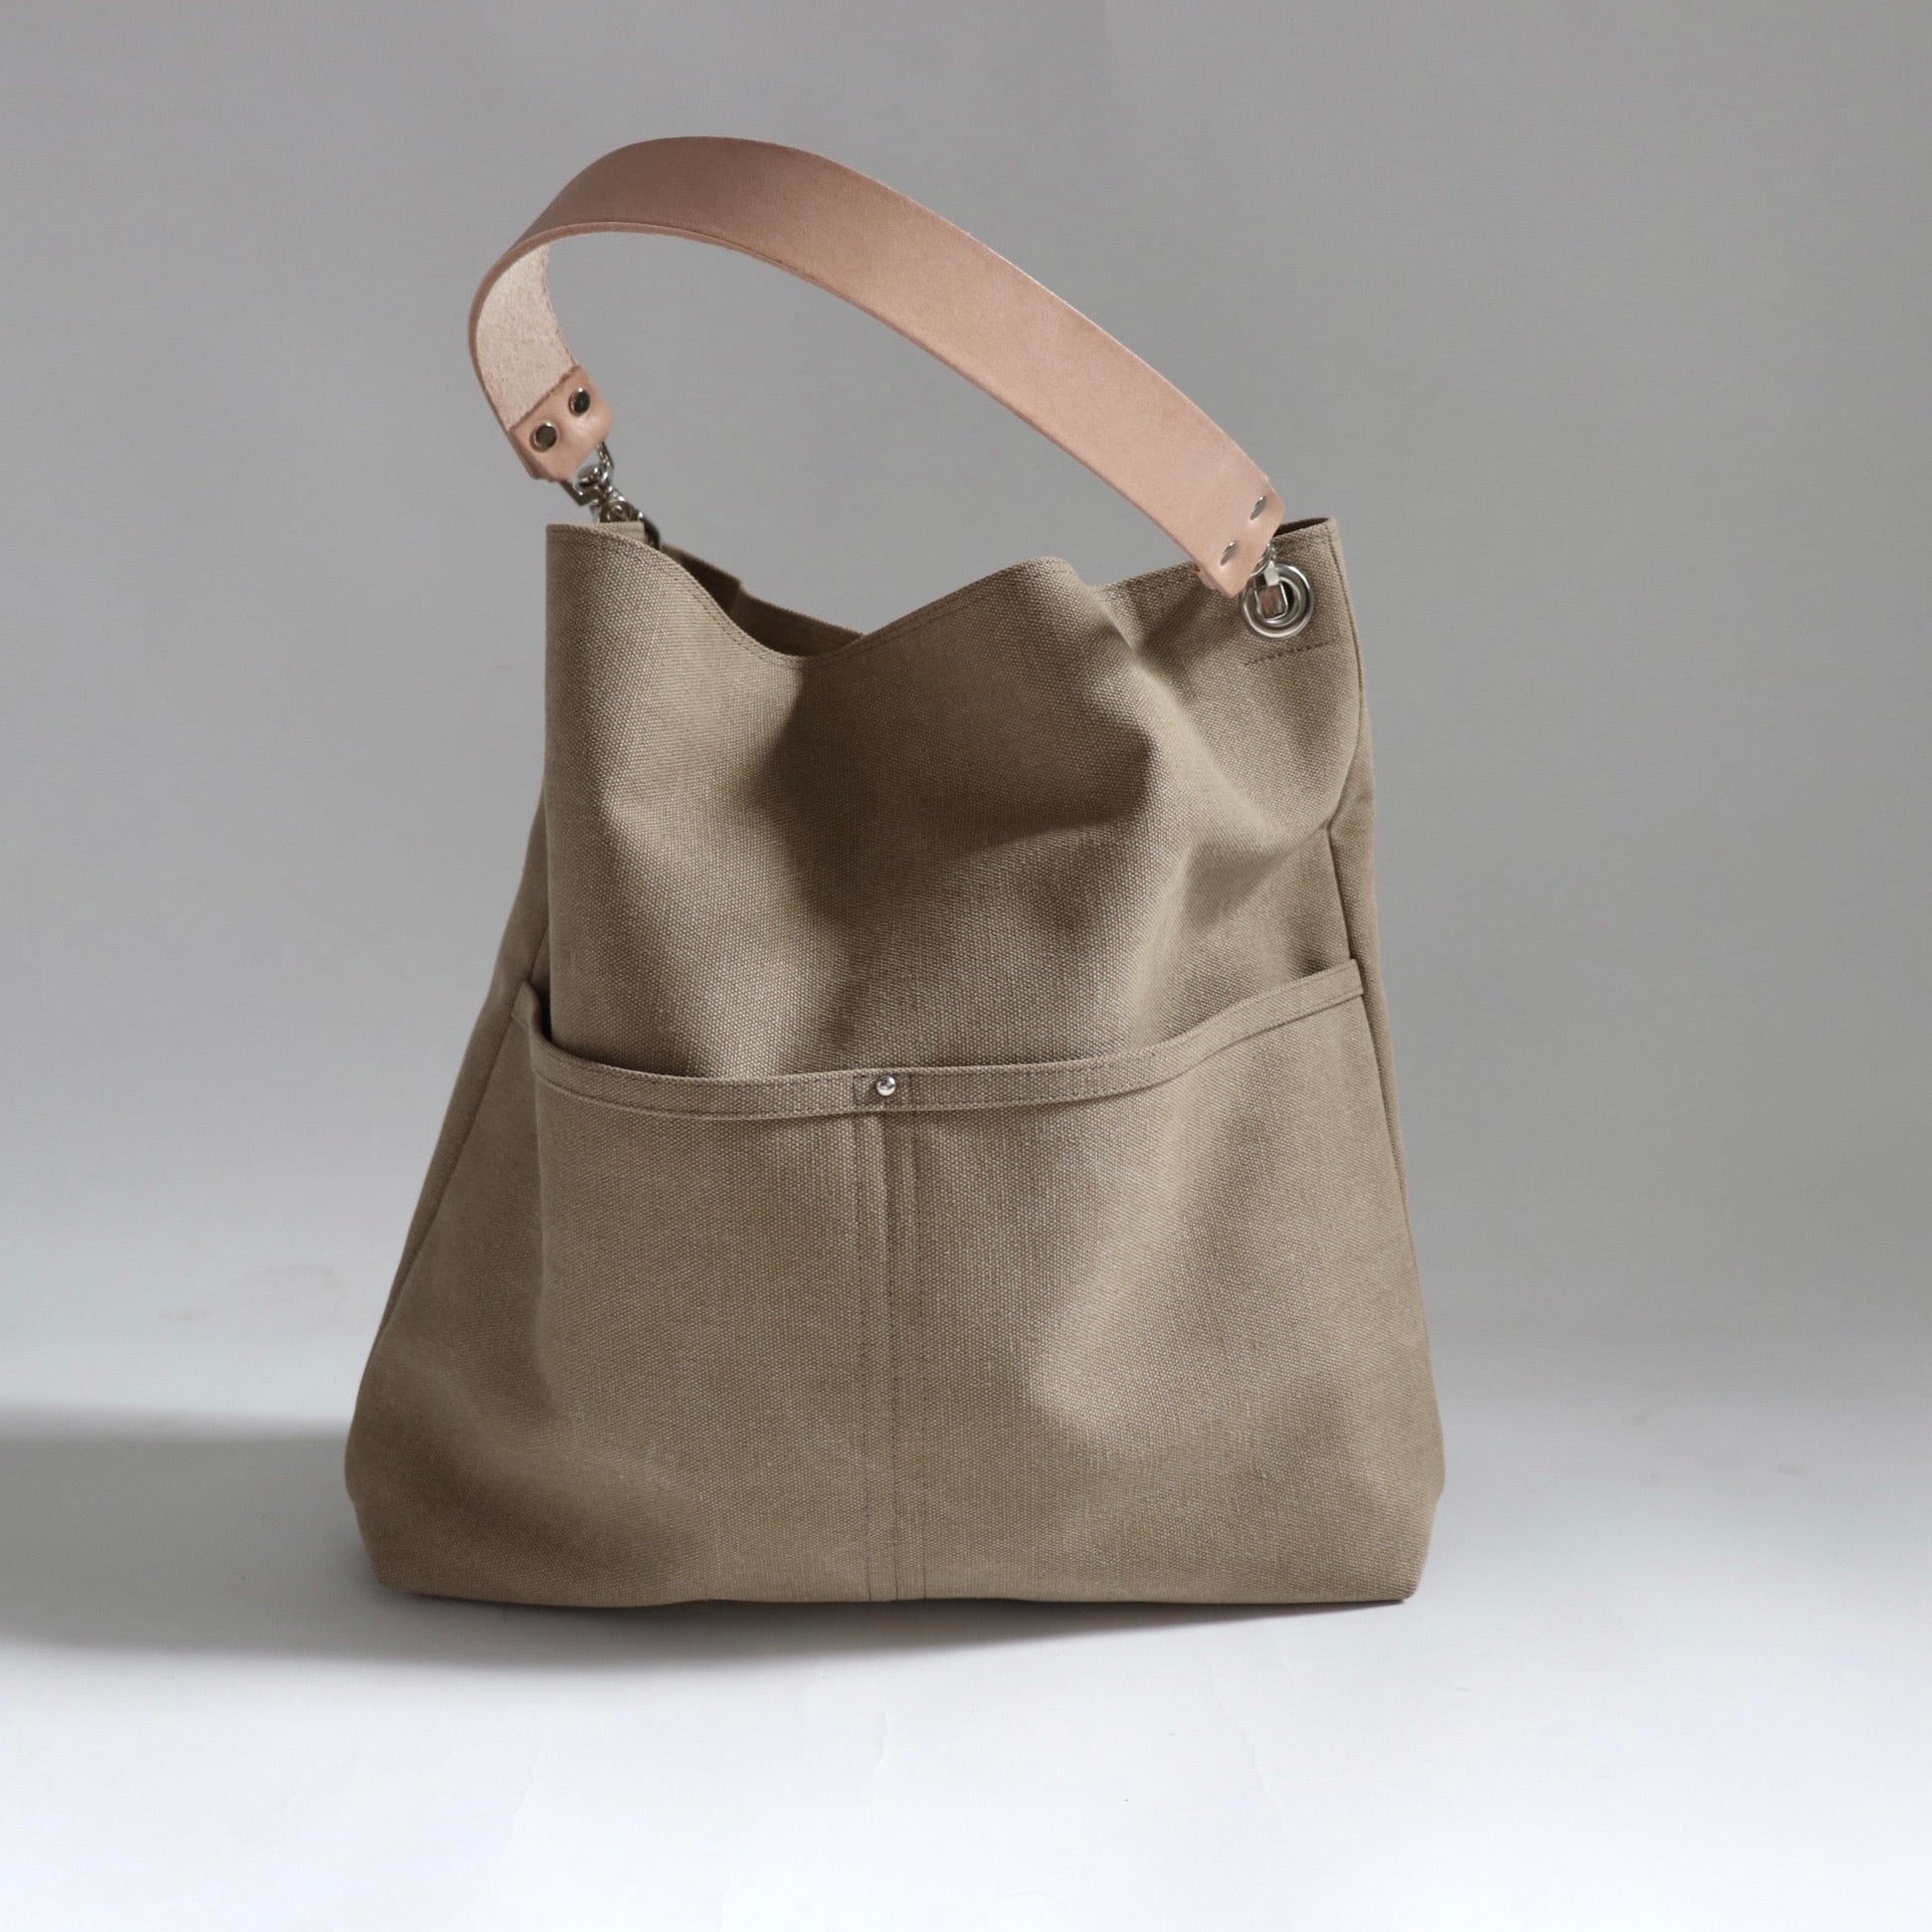 Canvas bag with natural leather strap